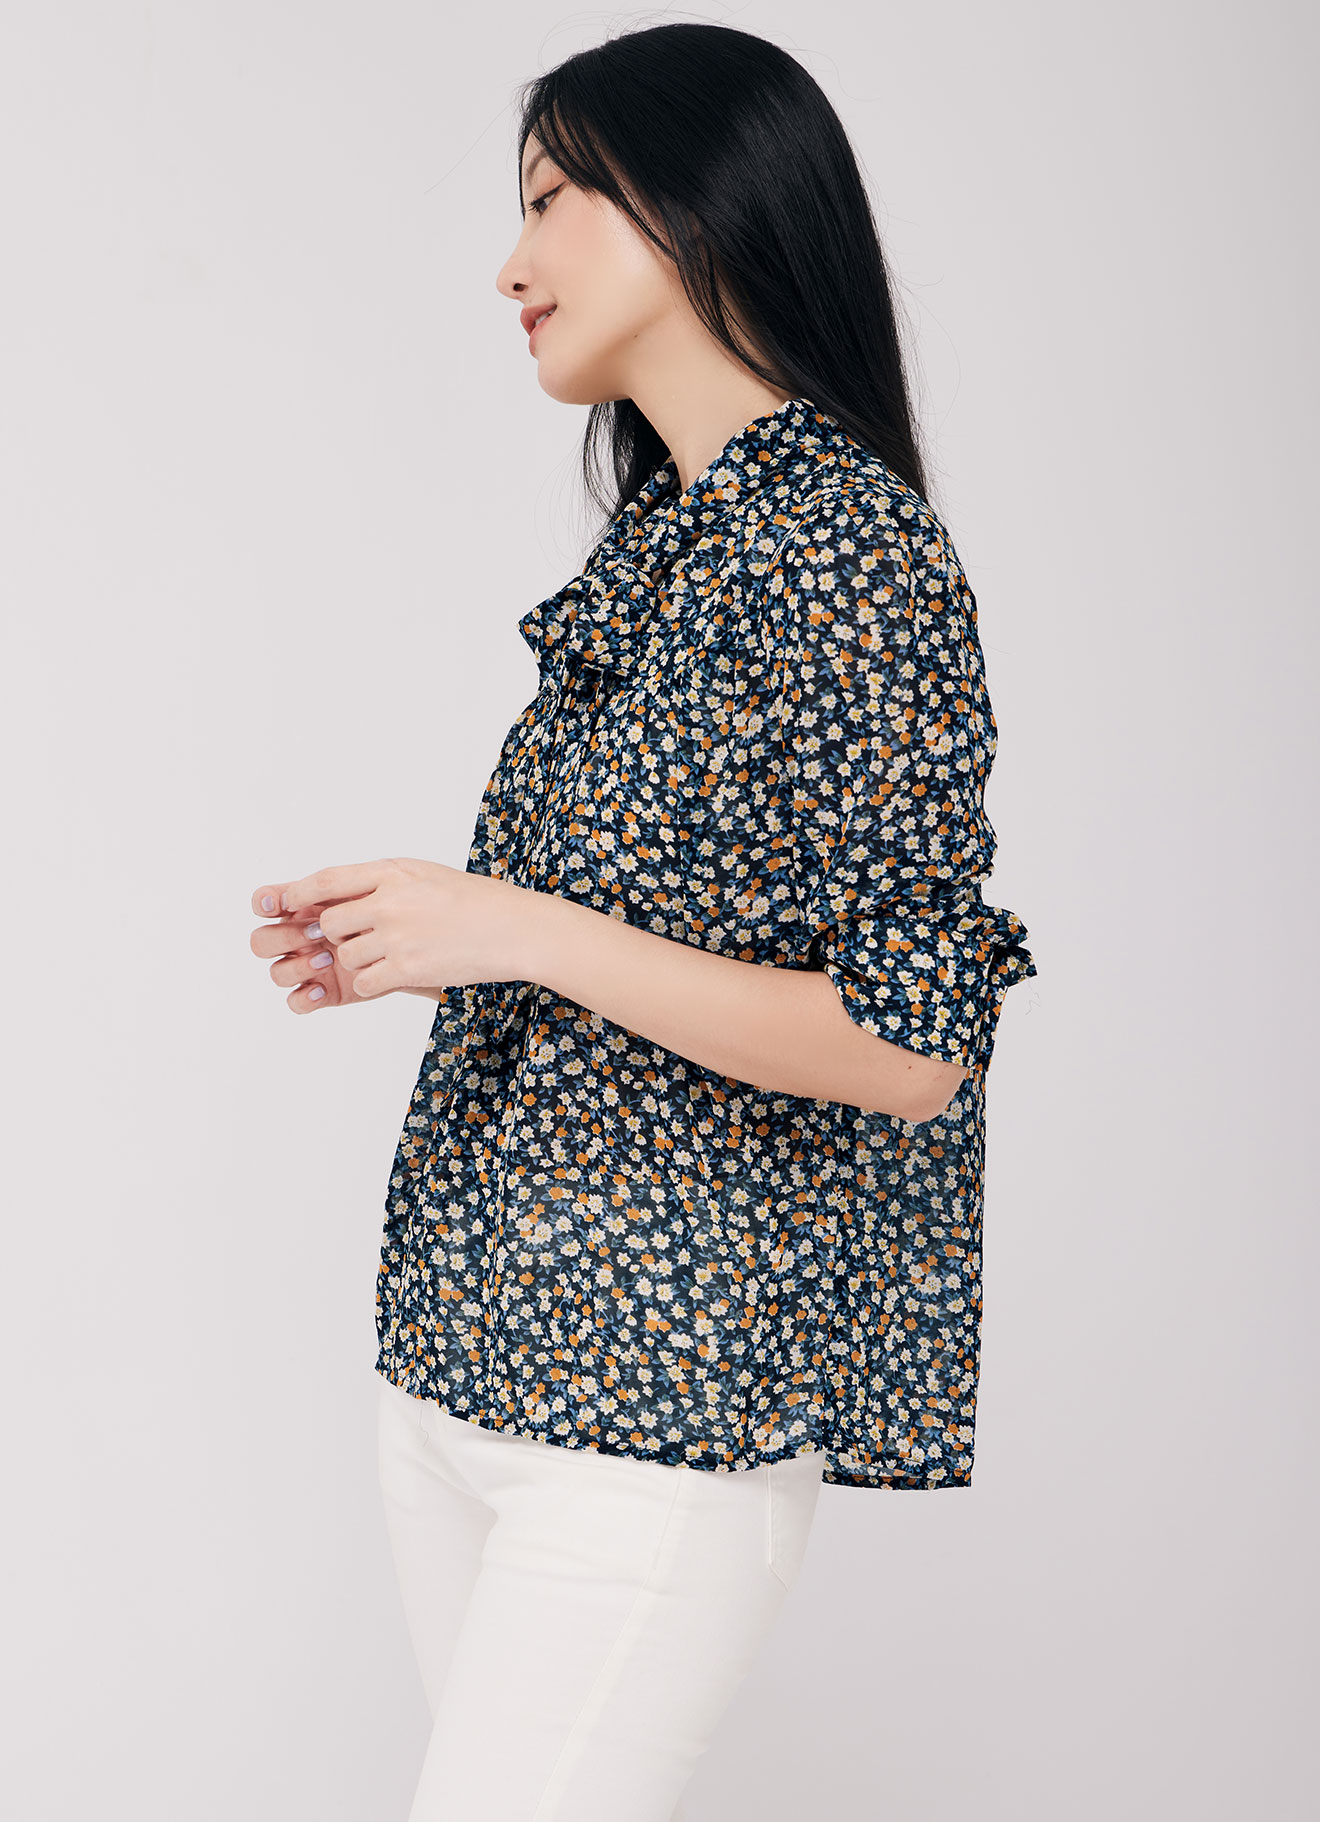 Insignia-Blue by Floral Printed Blouse